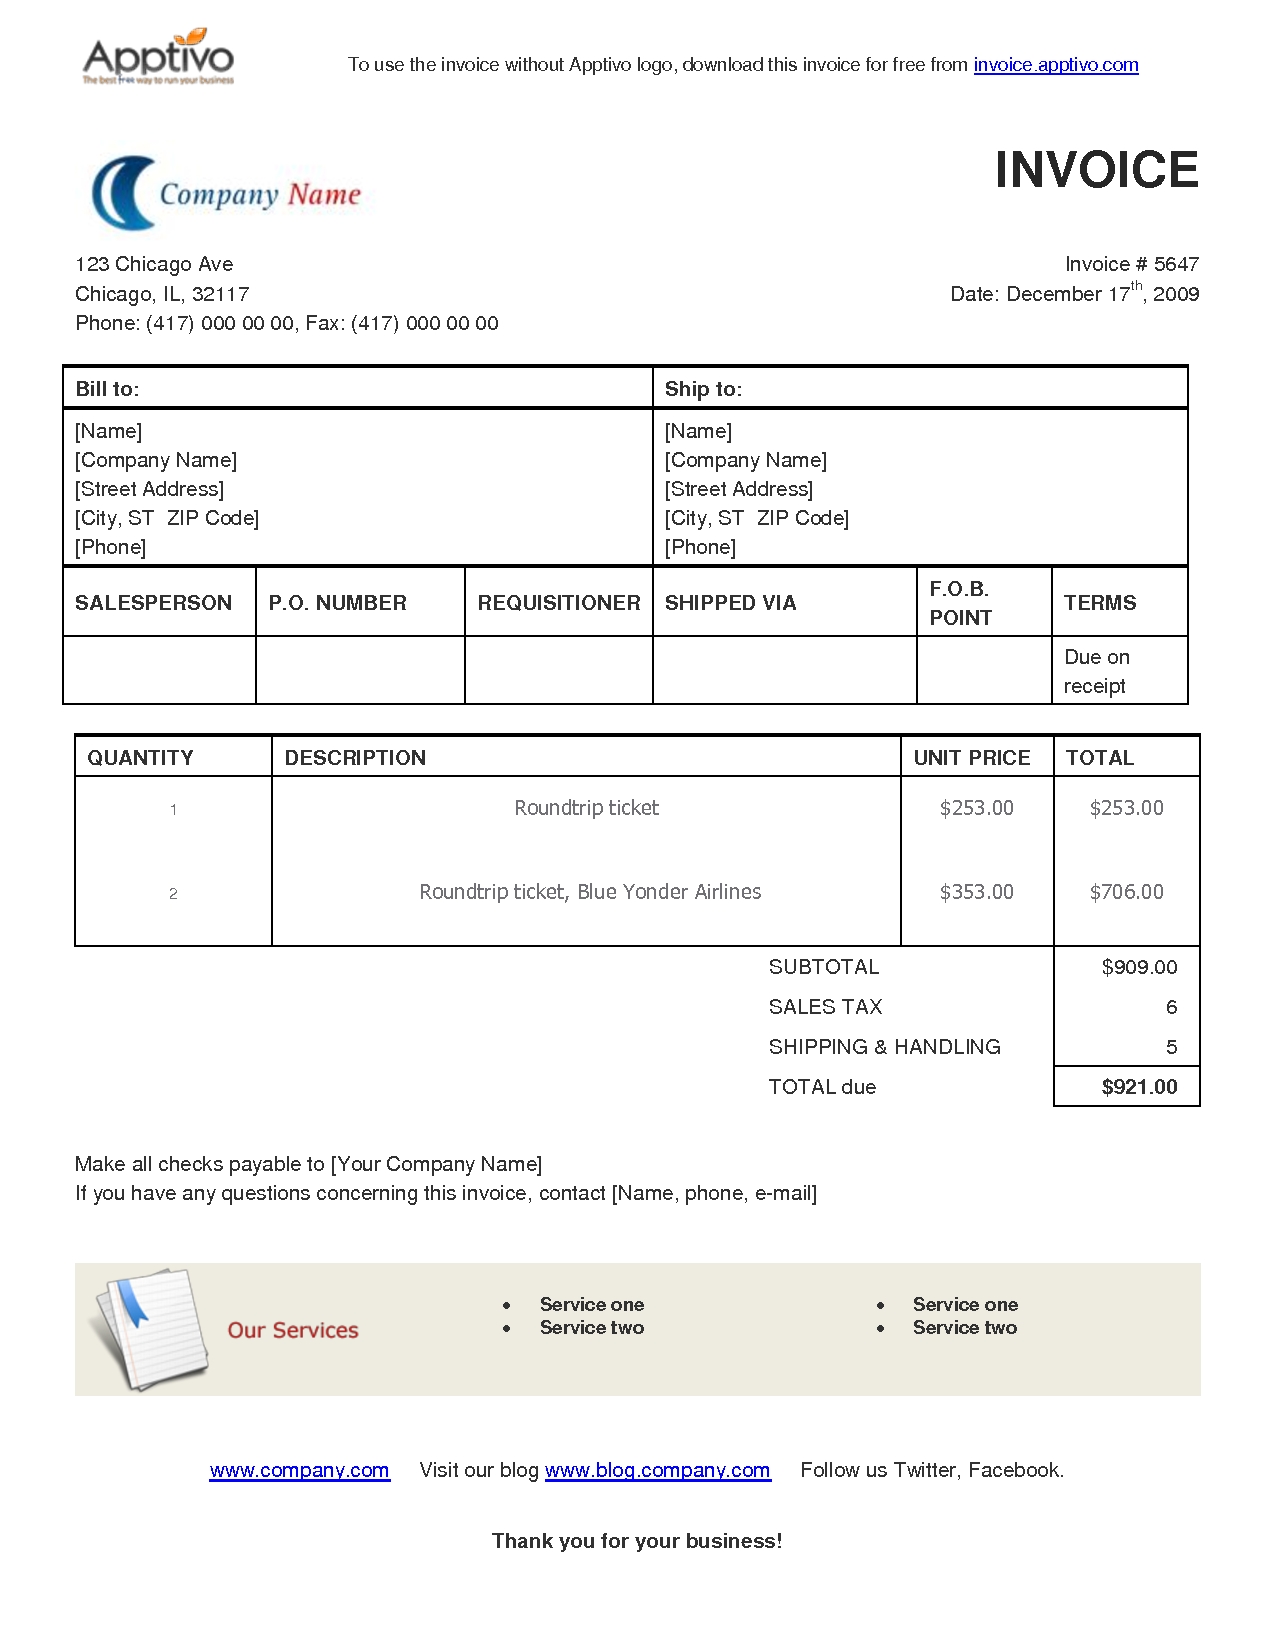 microsoft free invoice template 19 best photos of microsoft invoice template free invoice 1275 X 1650